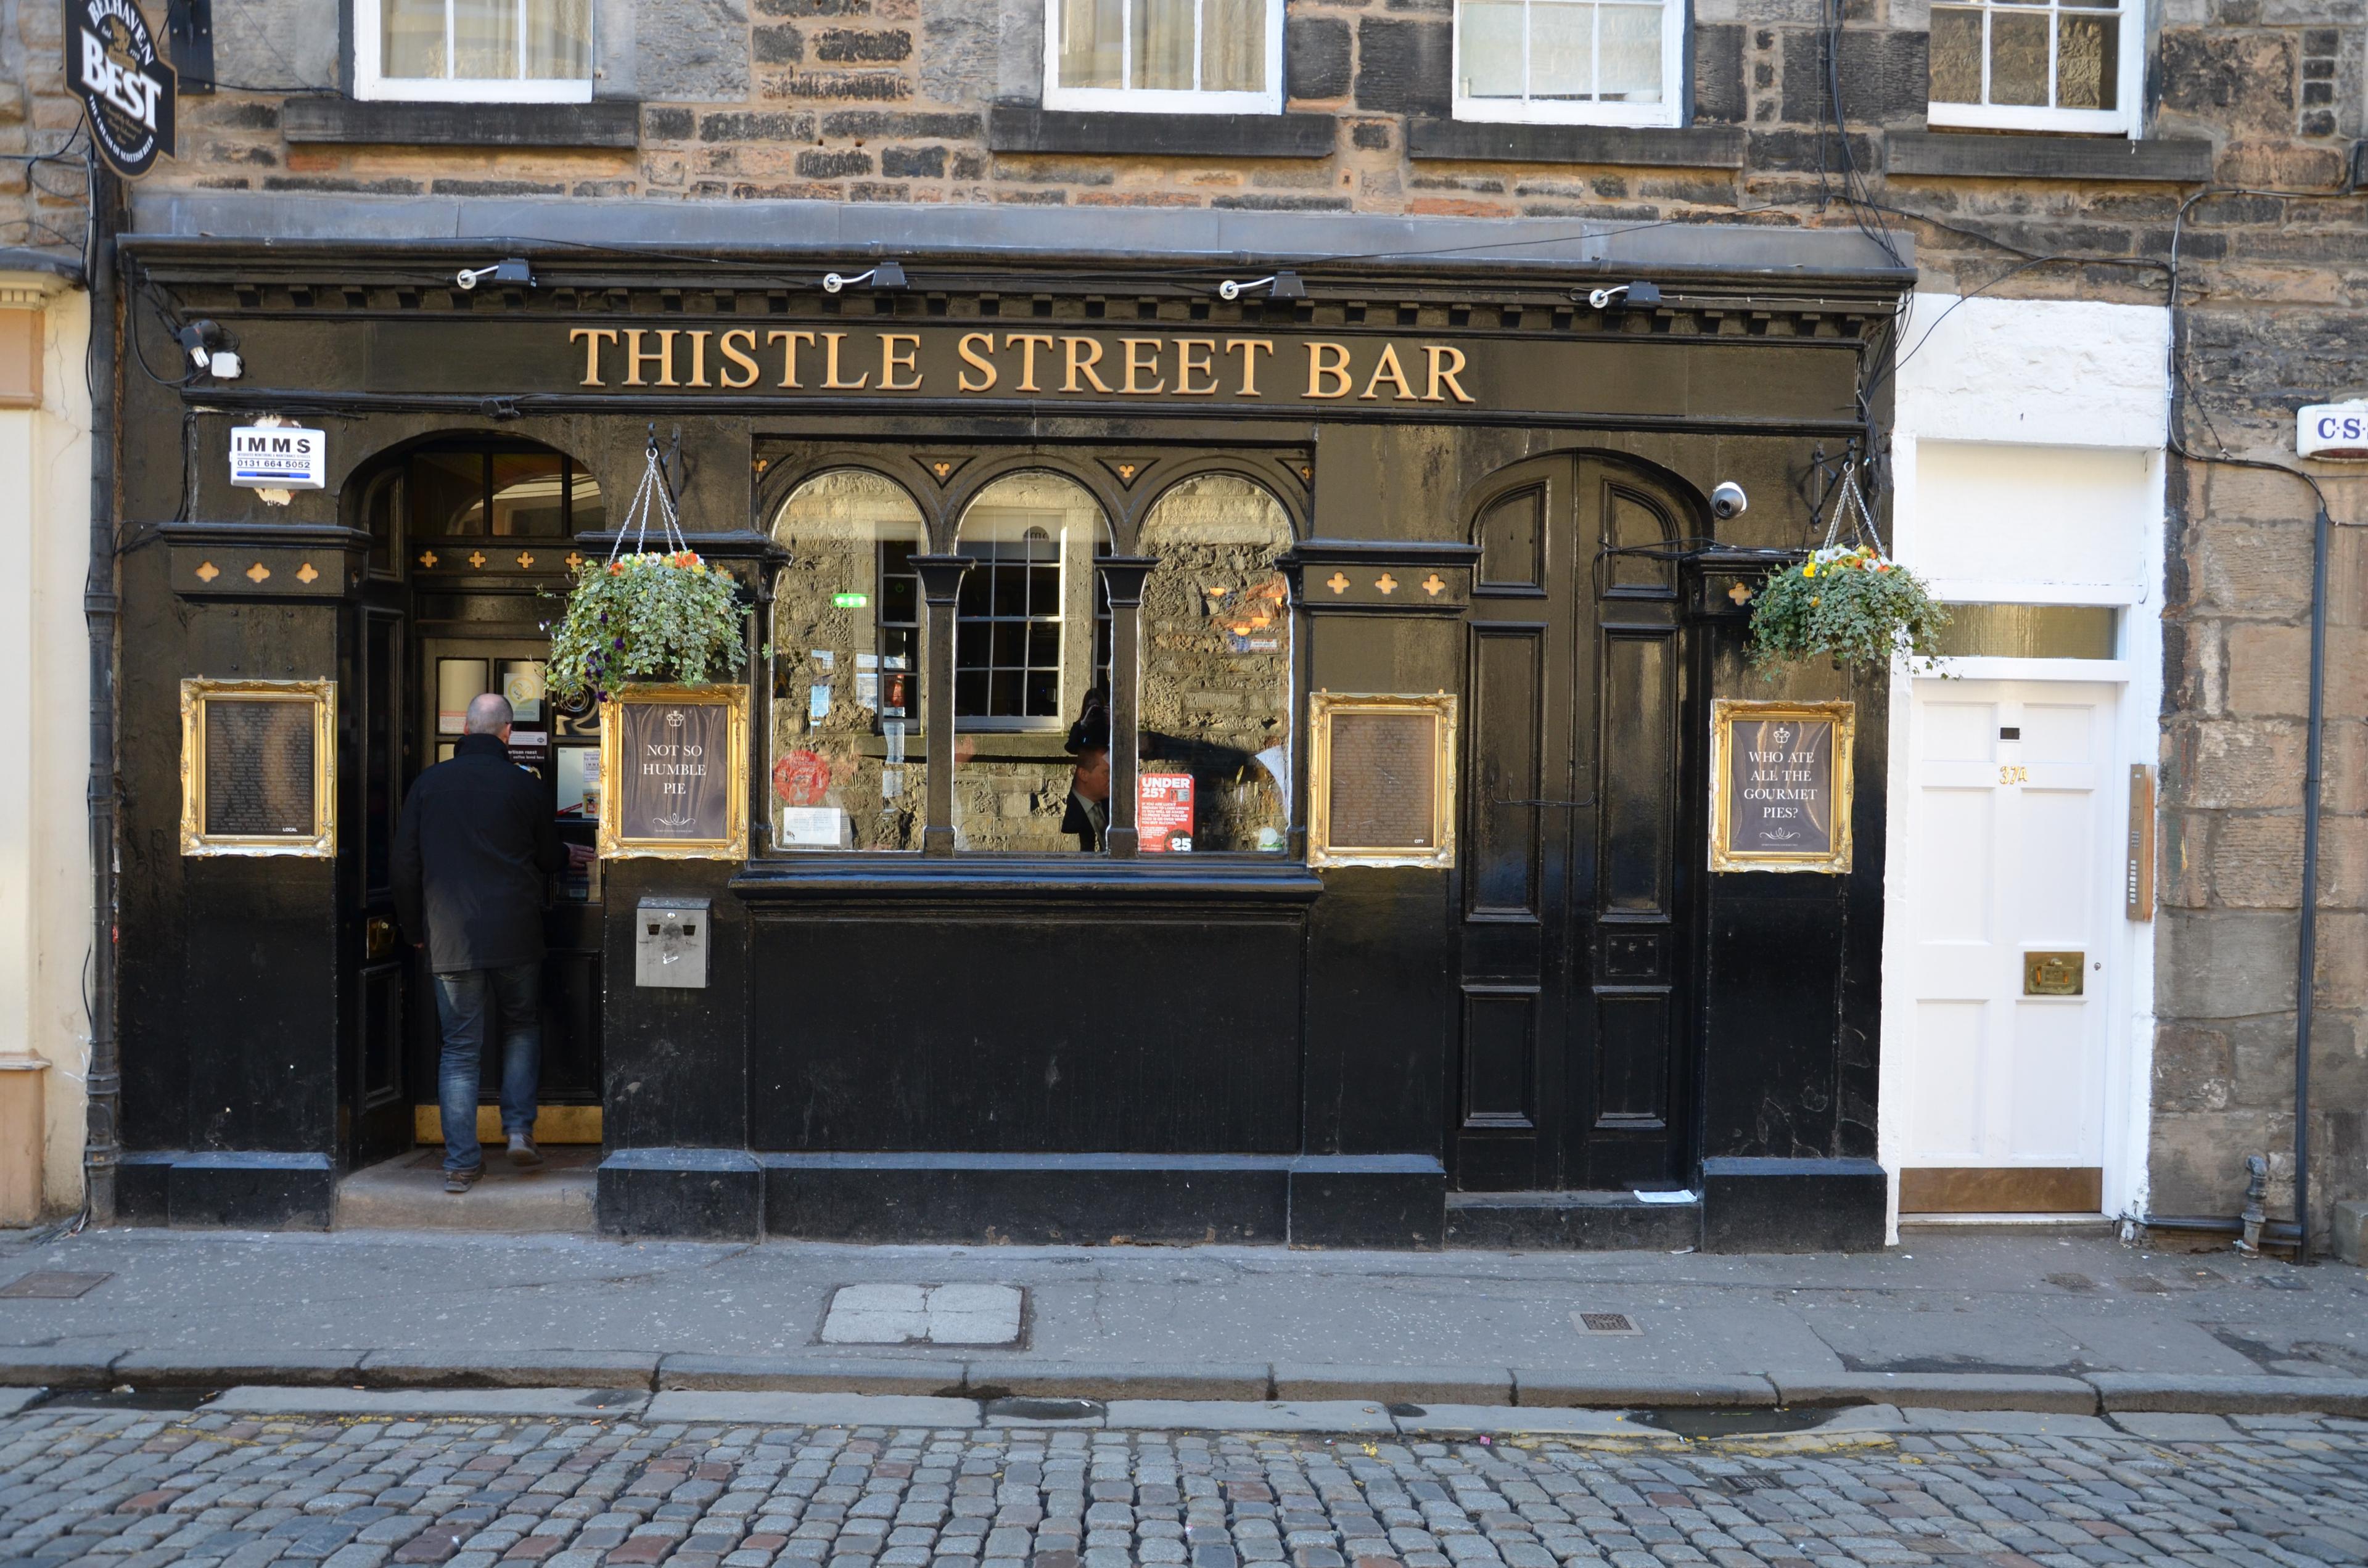 Cover image of this place Thistle Street Bar